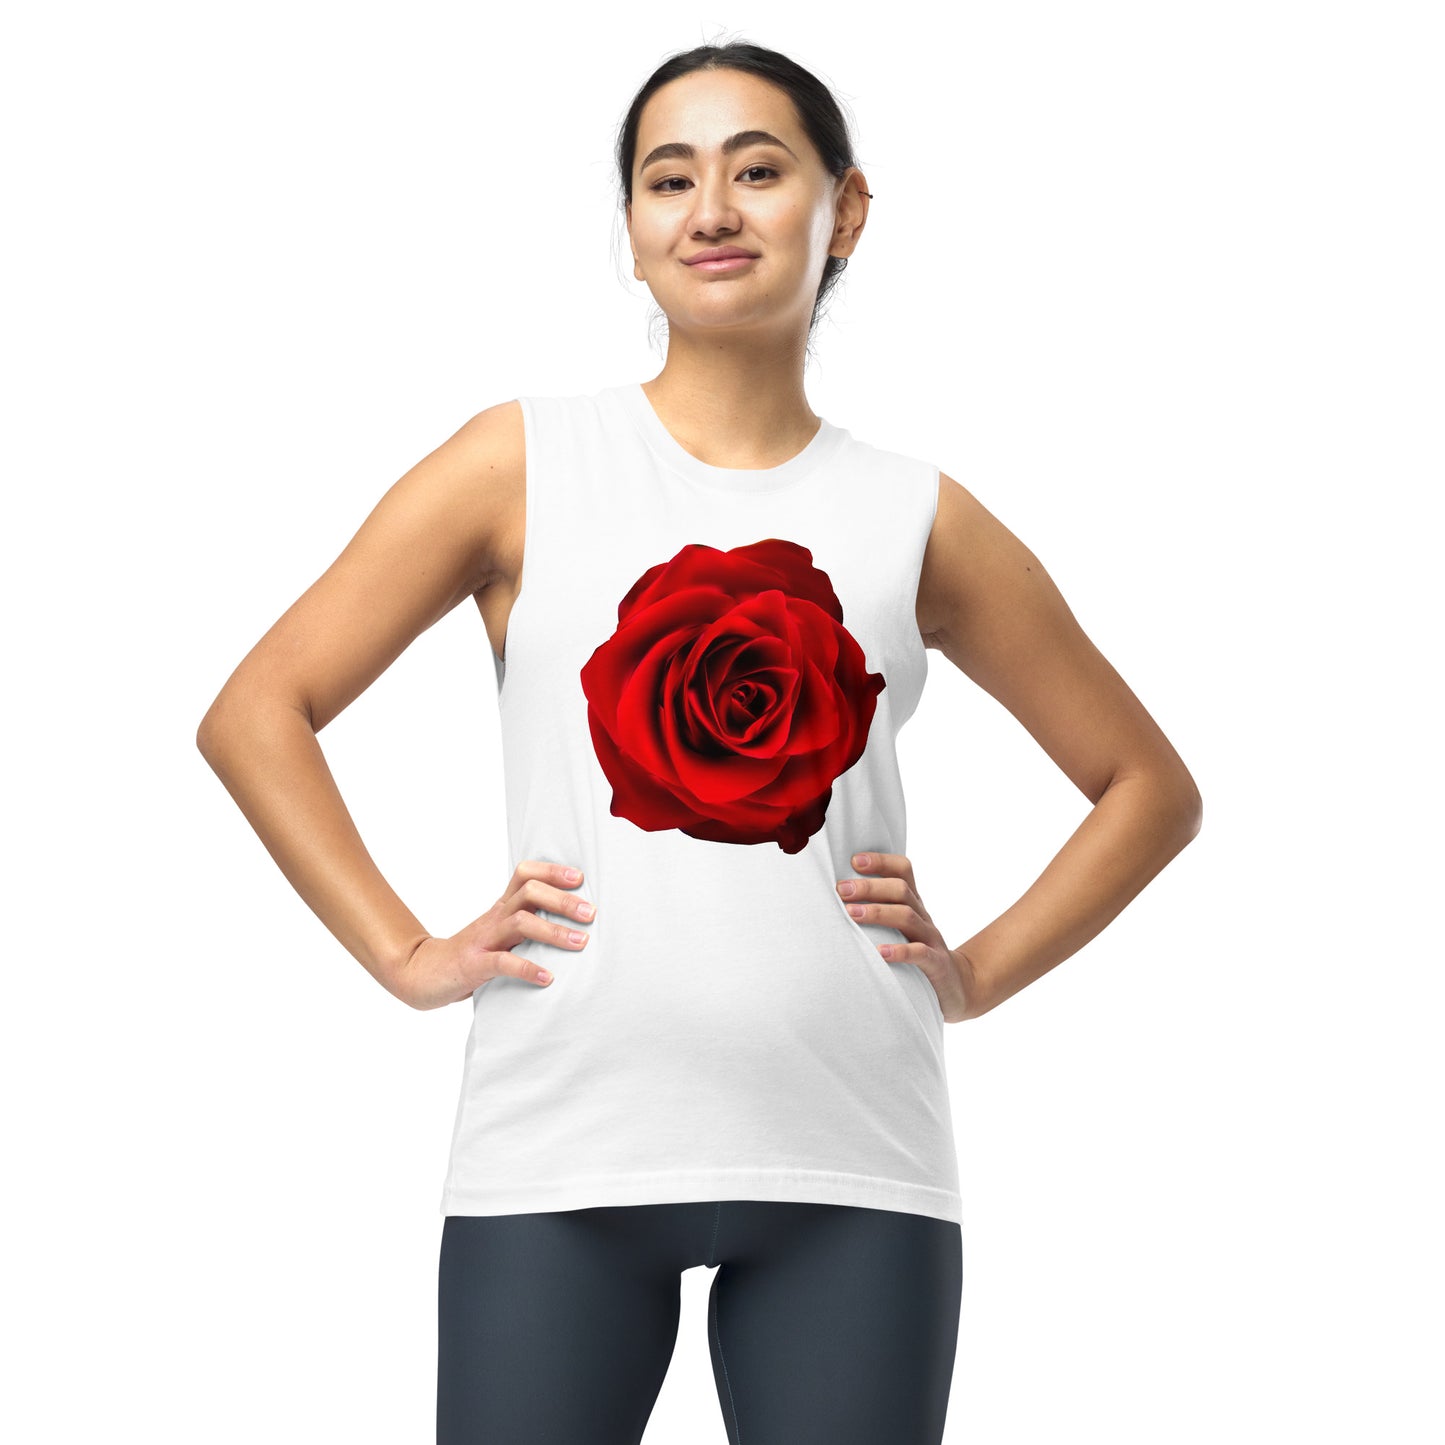 Vibrant Rose Muscle T-Shirt - A symbol of self-praise and empowerment, a perfect gift to yourself